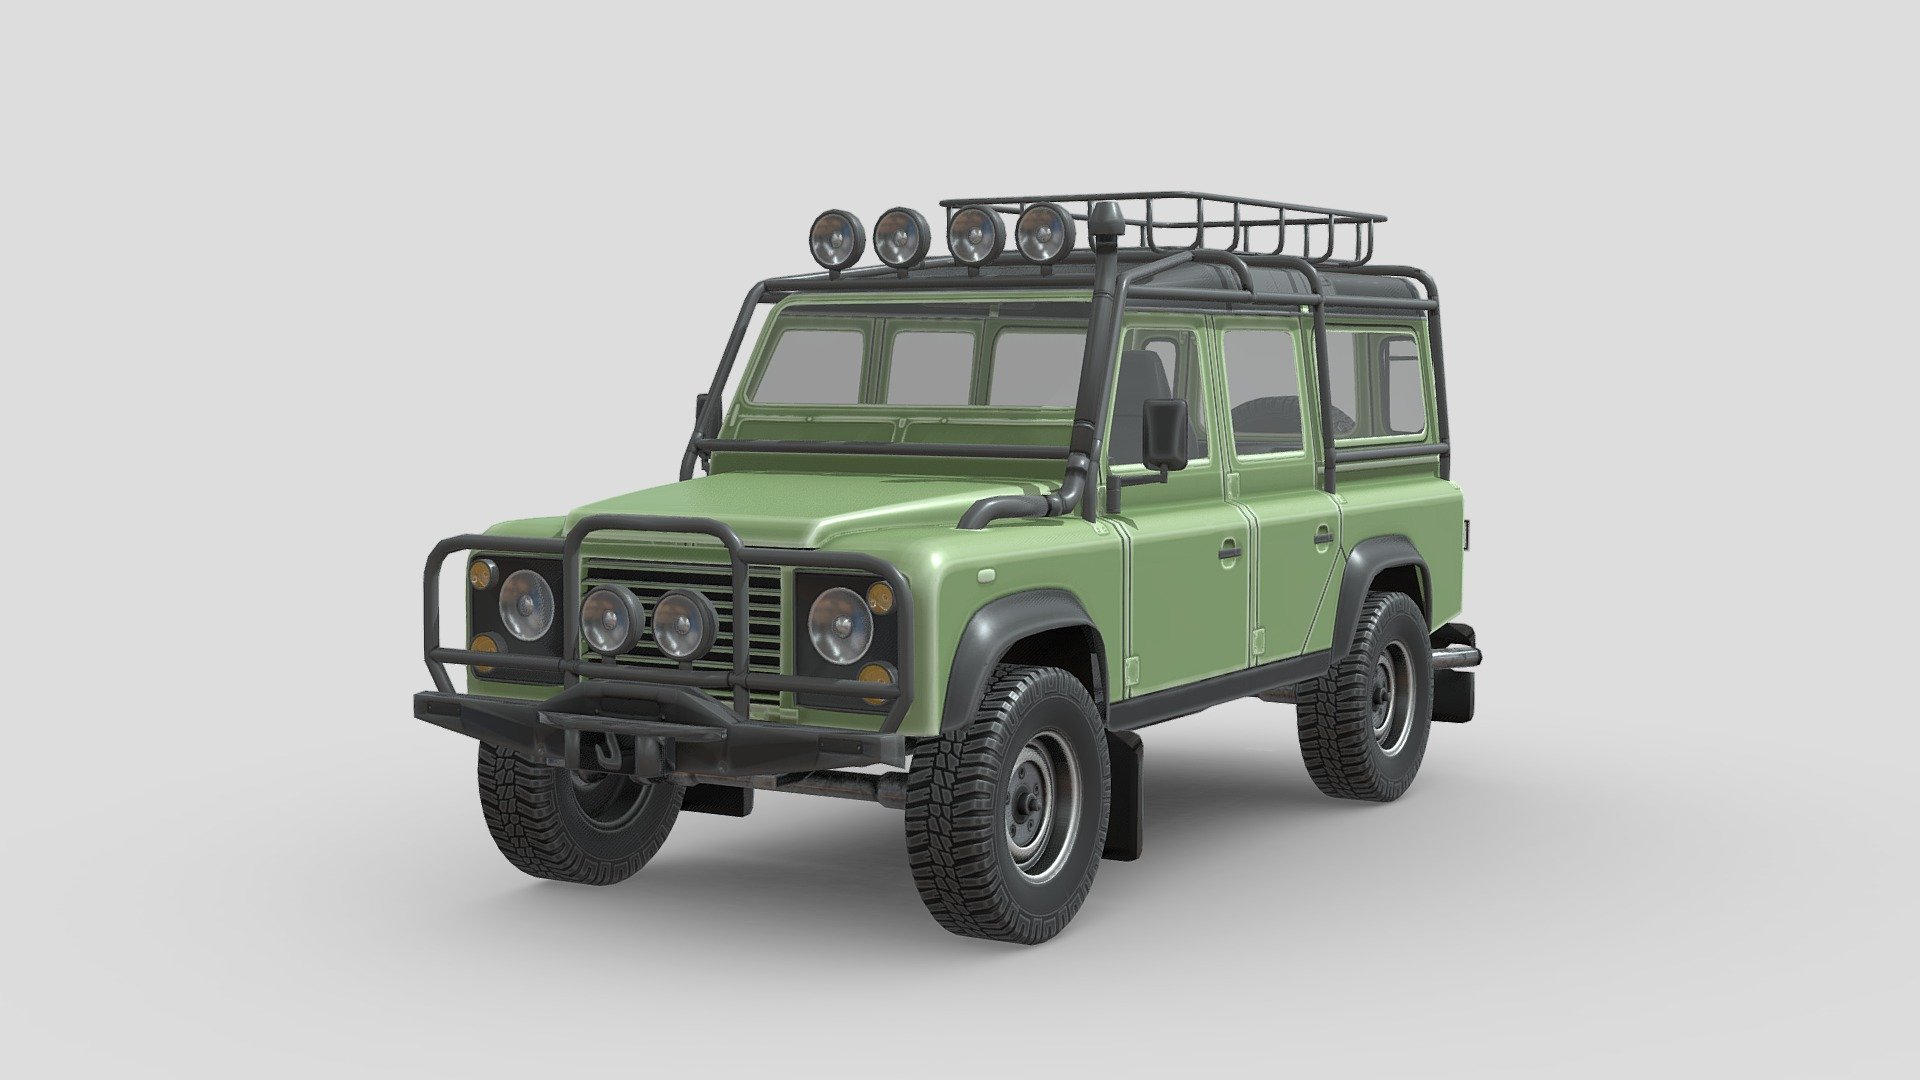 The Land Rover Defender (initially introduced as the Land Rover 110 / One Ten, and in 1984 joined by the Land Rover 90 / Ninety, plus the new, extra-length Land Rover 127 in 1985) is a series of British off-road cars and pick-up trucks. They consistently have four-wheel drive, and were developed in the 1980s from the original Land Rover series which was launched at the Amsterdam Motor Show in April 1948. Following the 1989 introduction of the Land Rover Discovery, the term &lsquo;Land Rover' became the name of a broader marque, and thus no longer worked as the name of a specific model; thus in 1990 Land Rover renamed the 90 and 110 as Defender 90 and Defender 110 respectively. The 127 became the Defender 130 3d model